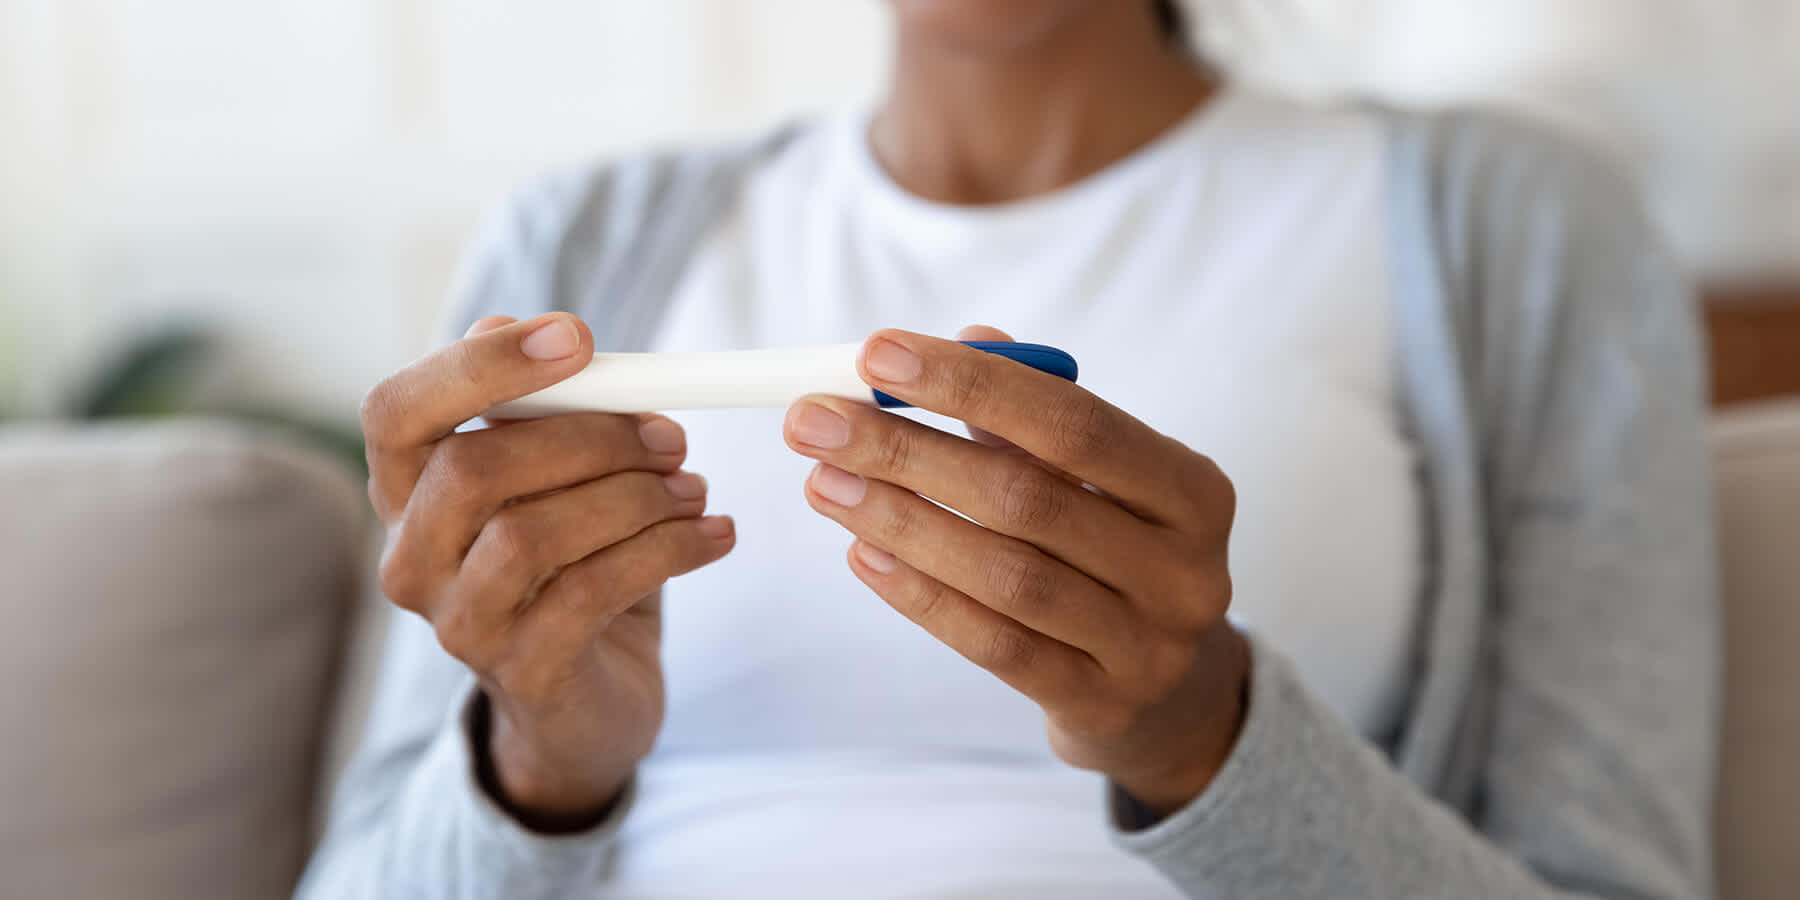 Woman holding a pregnancy test in her hands and looking at the result while wondering about FSH levels